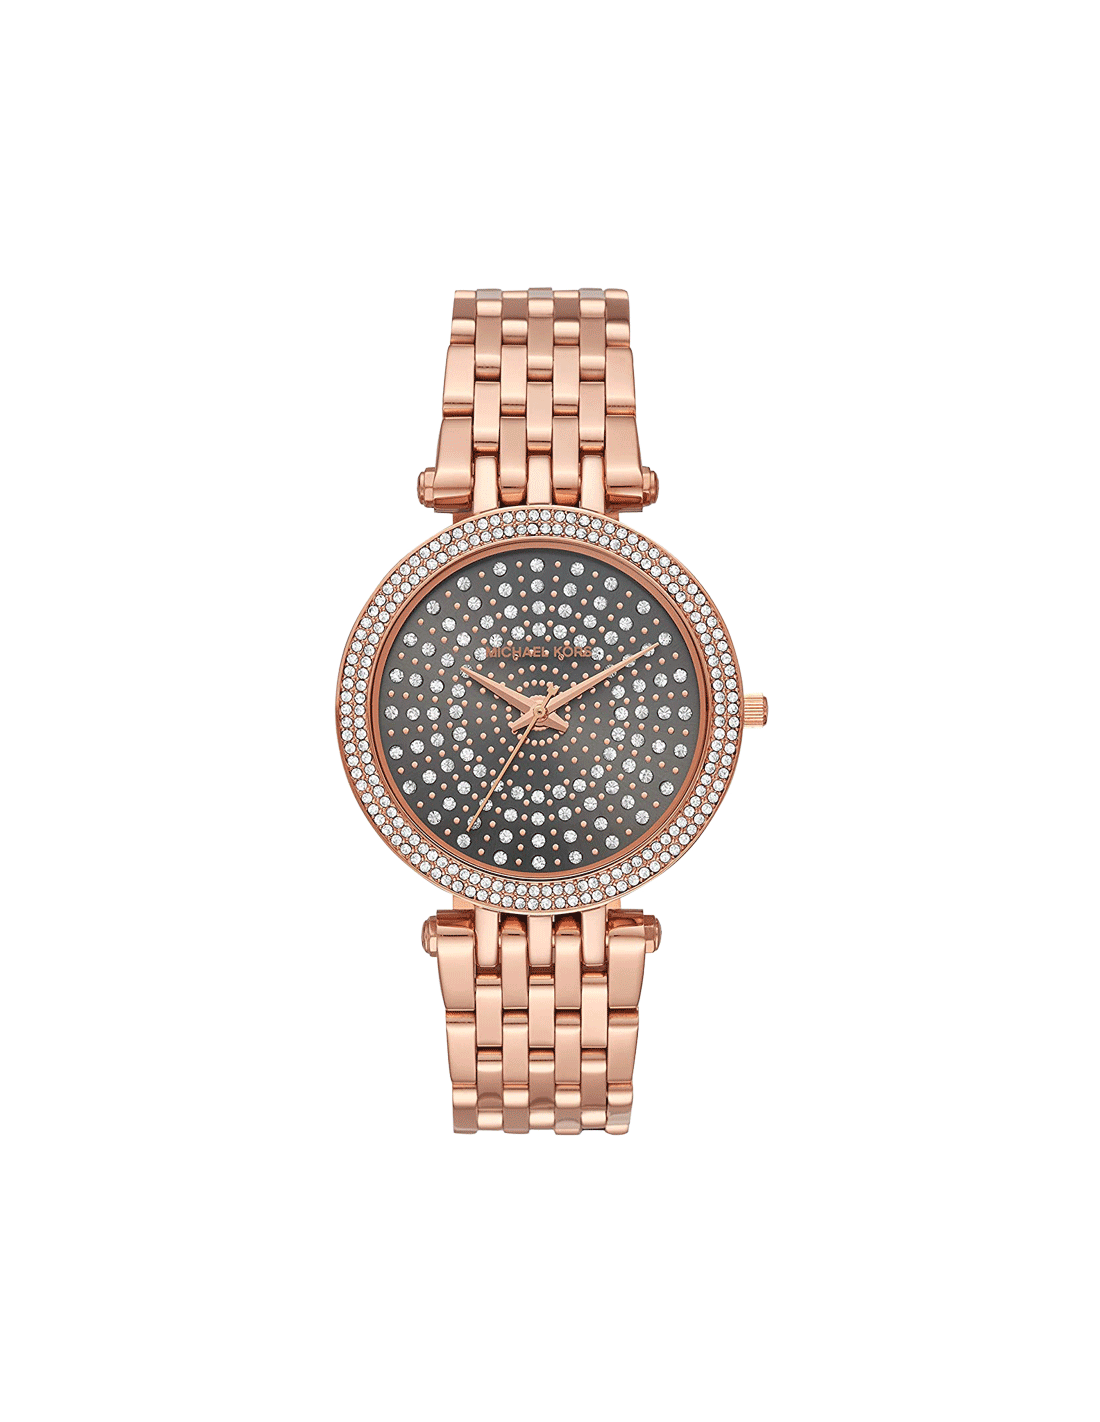 Buy Michael Kors Watches for Men & Women in India | Swiss Time House